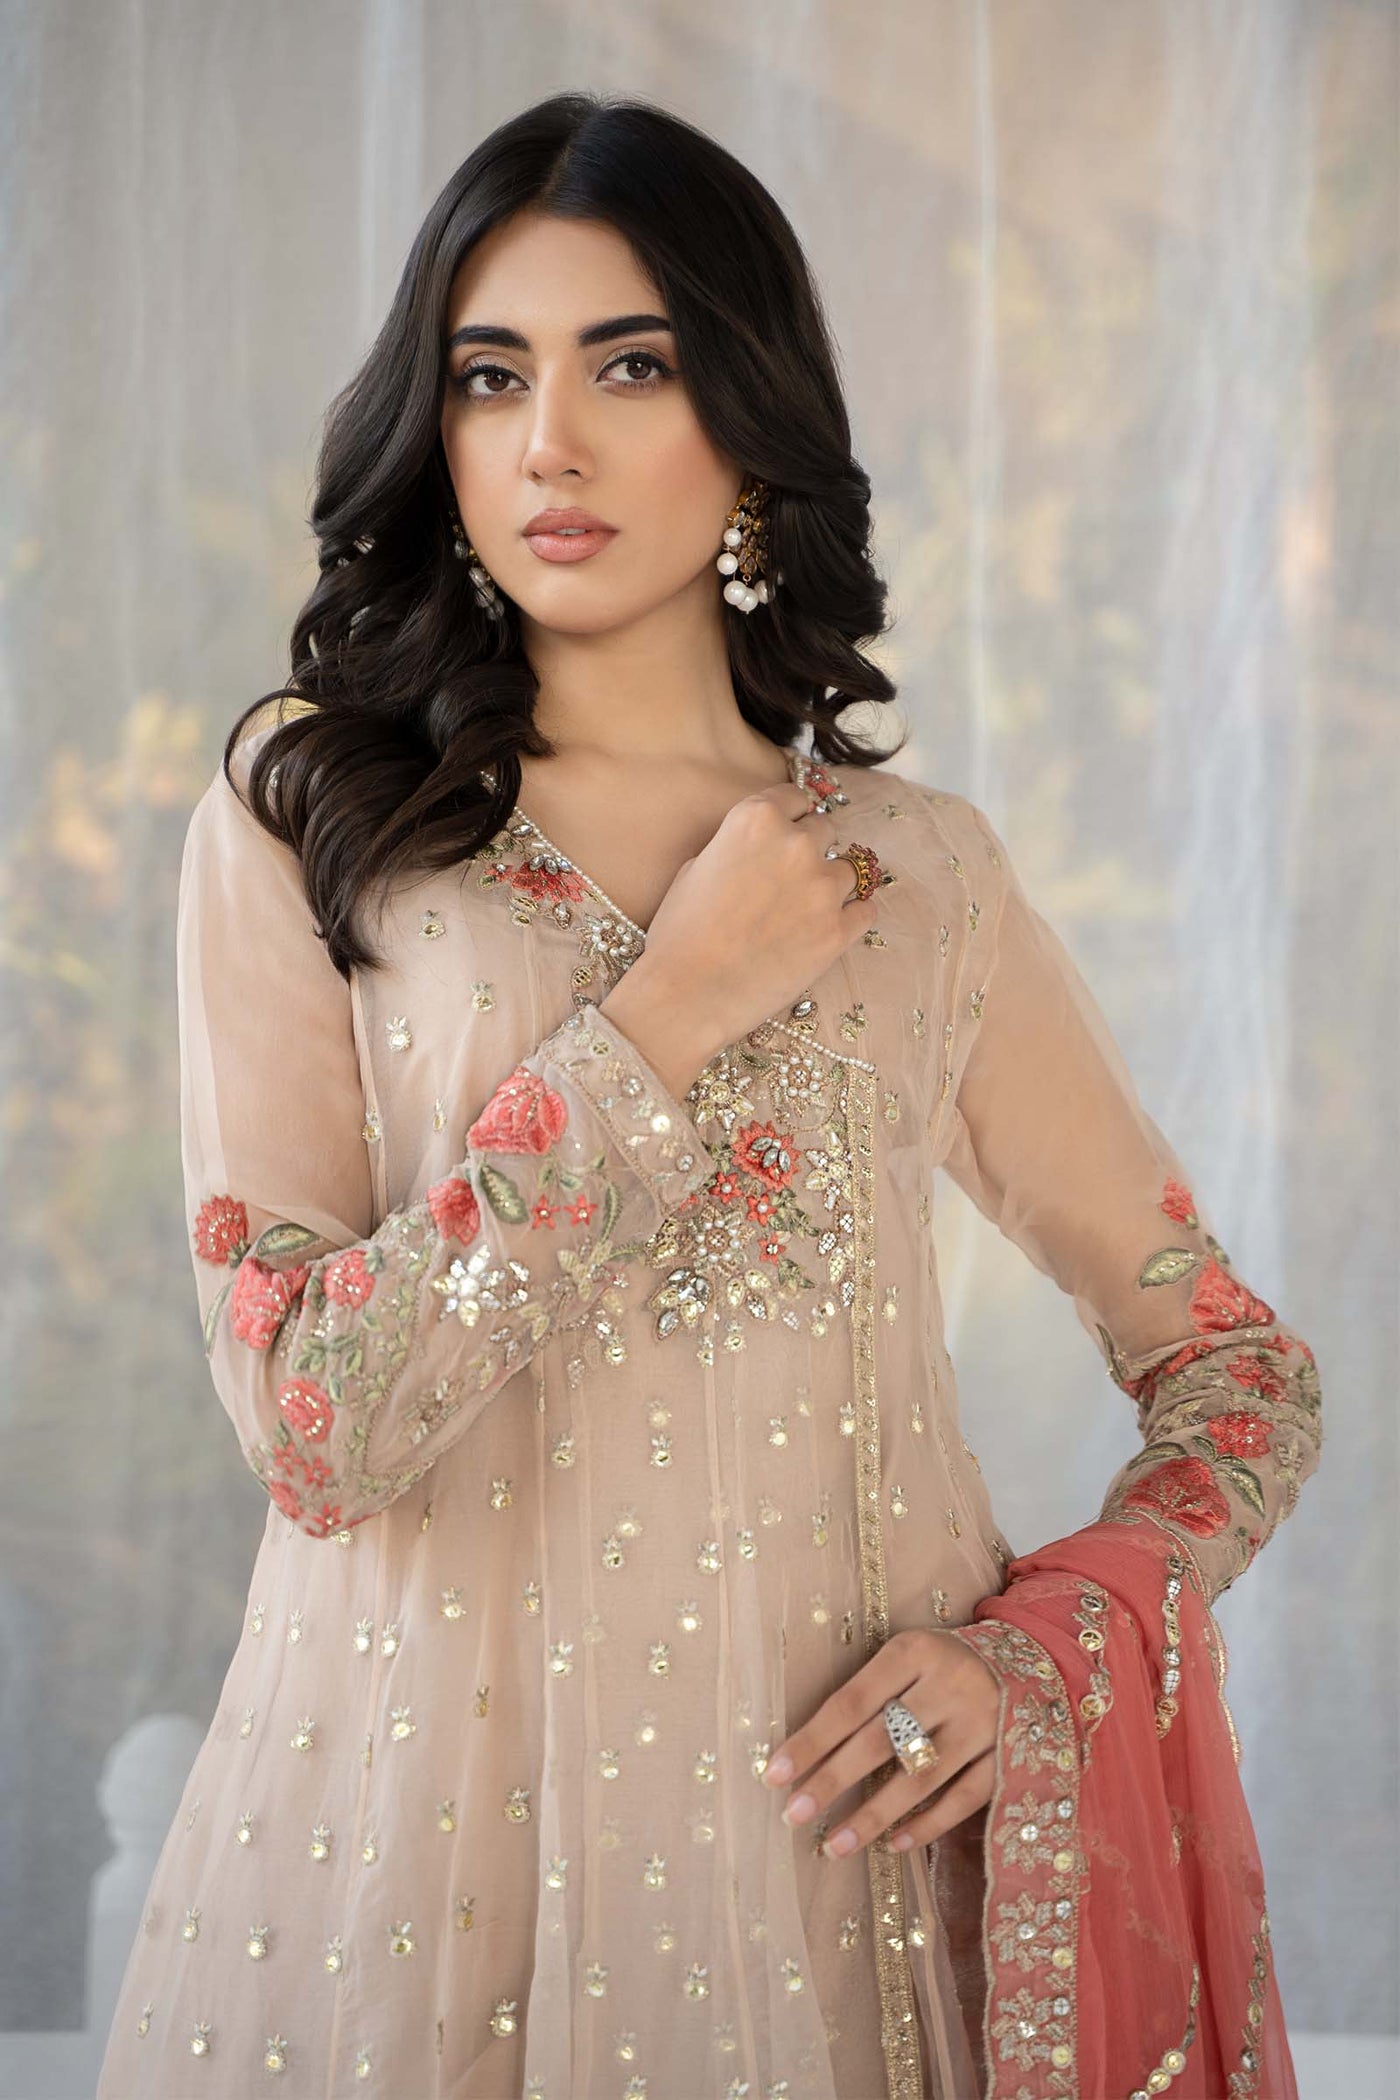 3 PIECE EMBROIDERED ORGANZA SUIT | SF-EF24-38